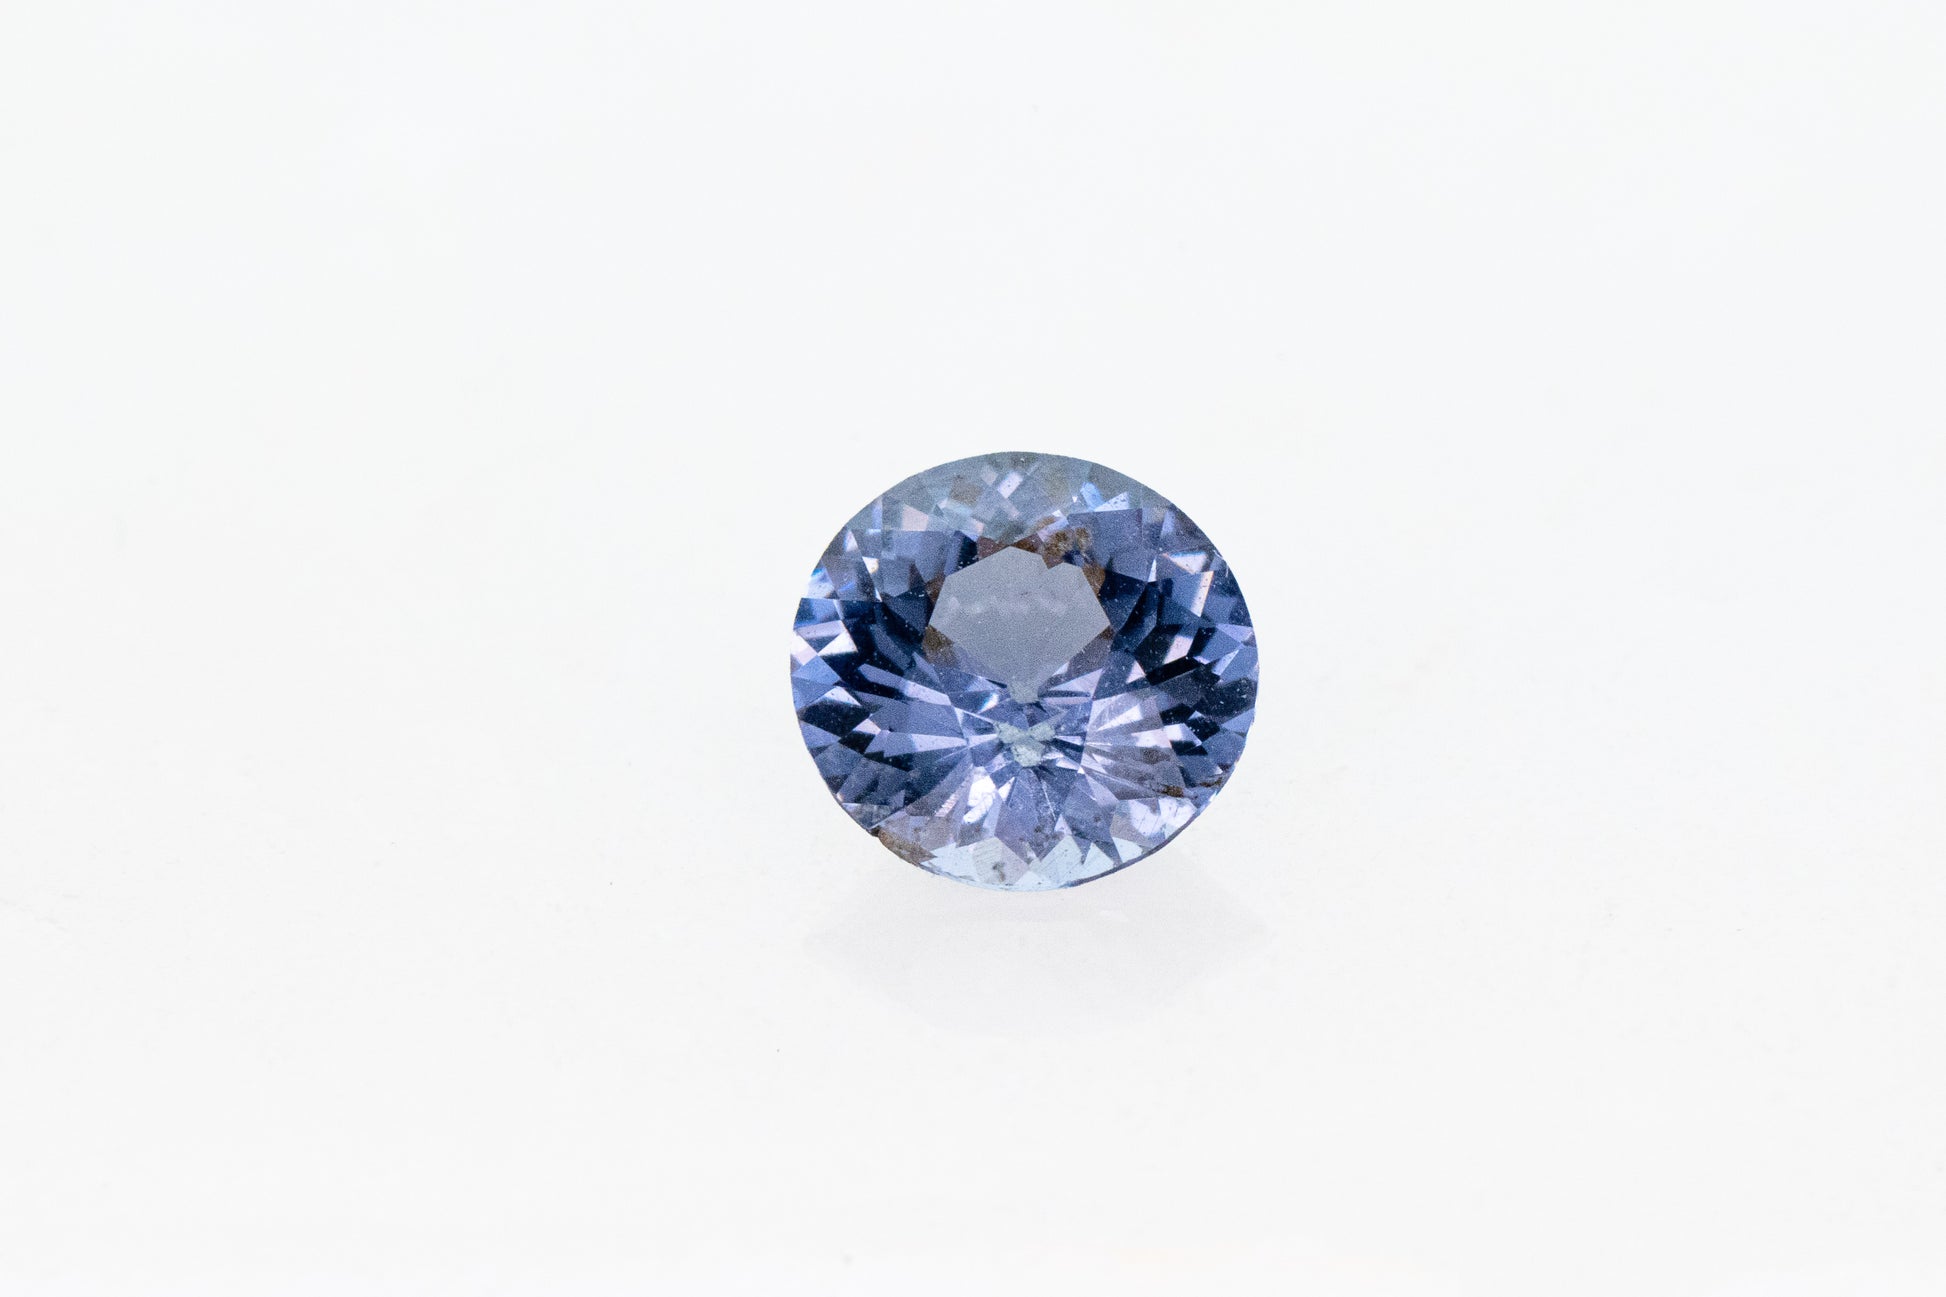 A handmade Round Blue Spinel on a white background.